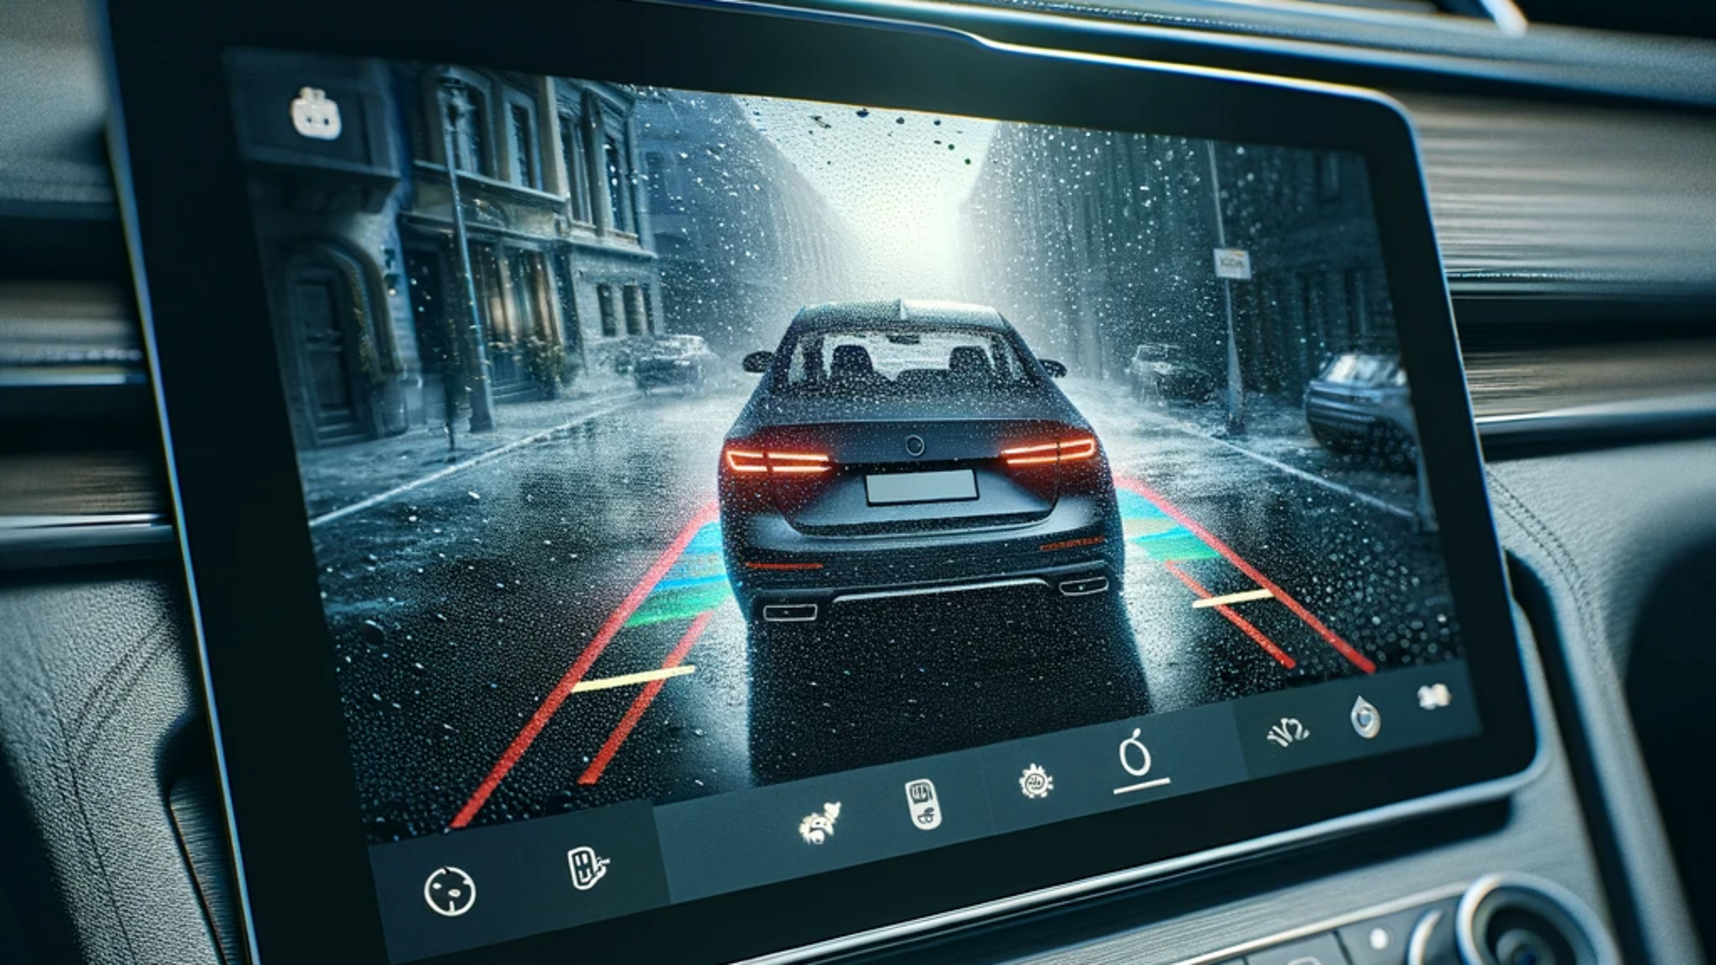 DALL·E 2024-01-29 20.05.38 - Create an interior view of a modern car from the driver's perspective, focusing on the in-dash screen displaying the rear view camera's output while r.png